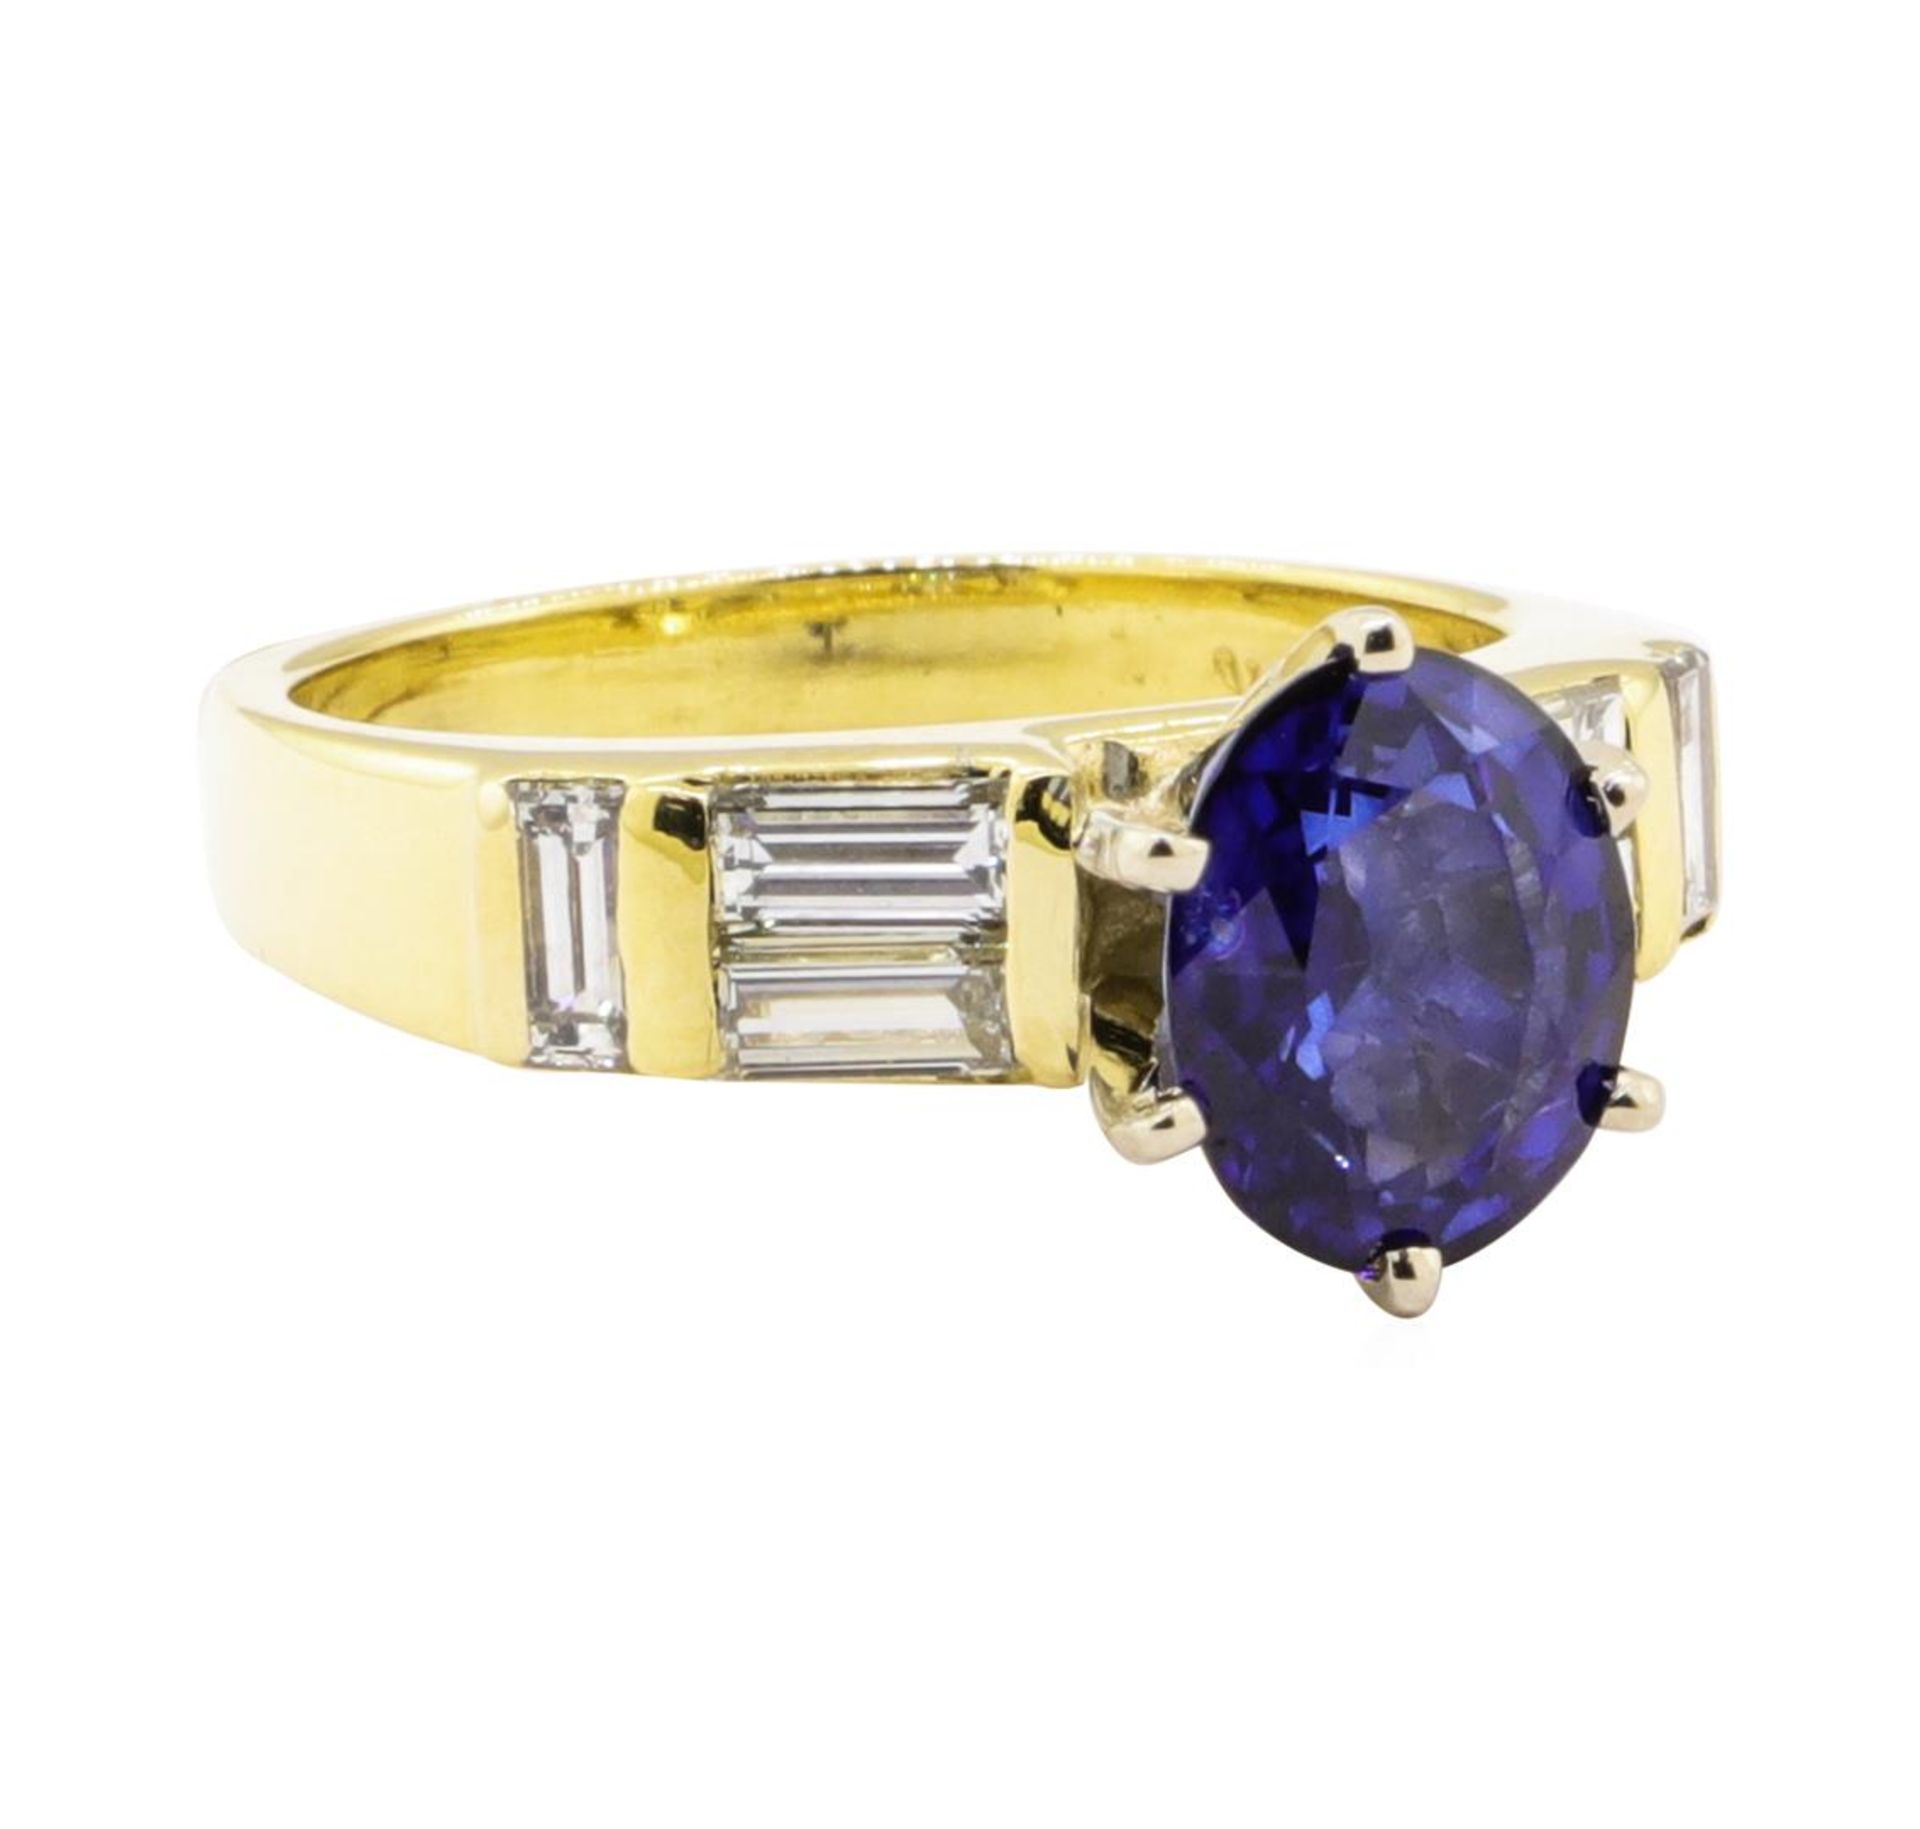 2.93 ctw Blue Sapphire And Diamond With Elevated Shoulders - 18KT Yellow Gold